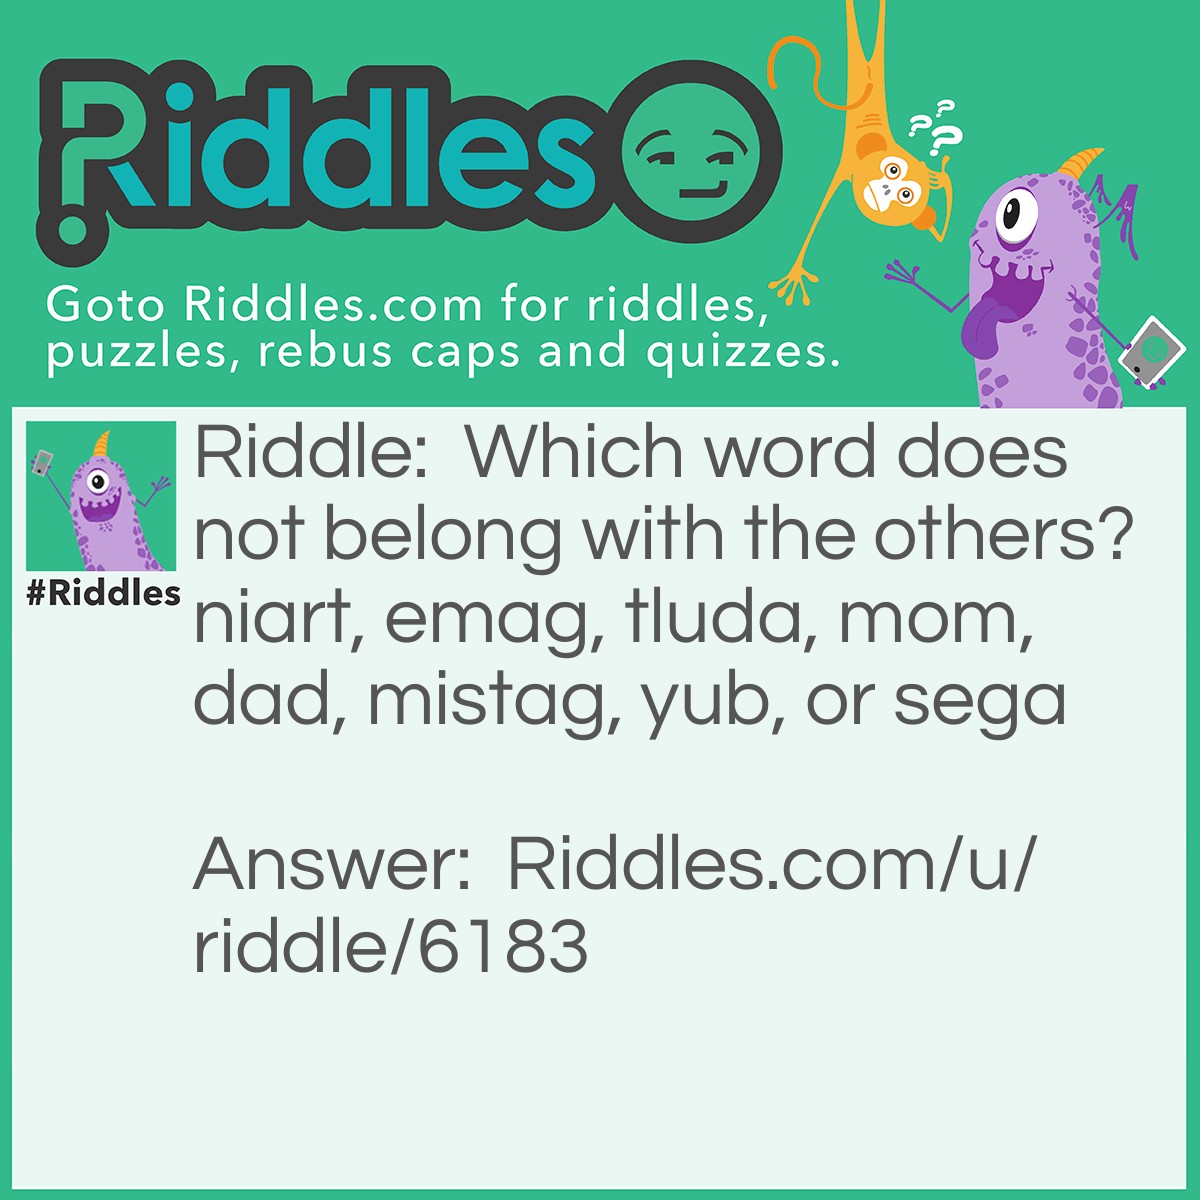 Riddle: Which word does not belong with the others? niart, emag, tluda, mom, dad, mistag, yub, or sega Answer: Mistag. It is the only one that backwards does not make sense. Train, game, adult, mom, dad, gatsim, buy, and ages.